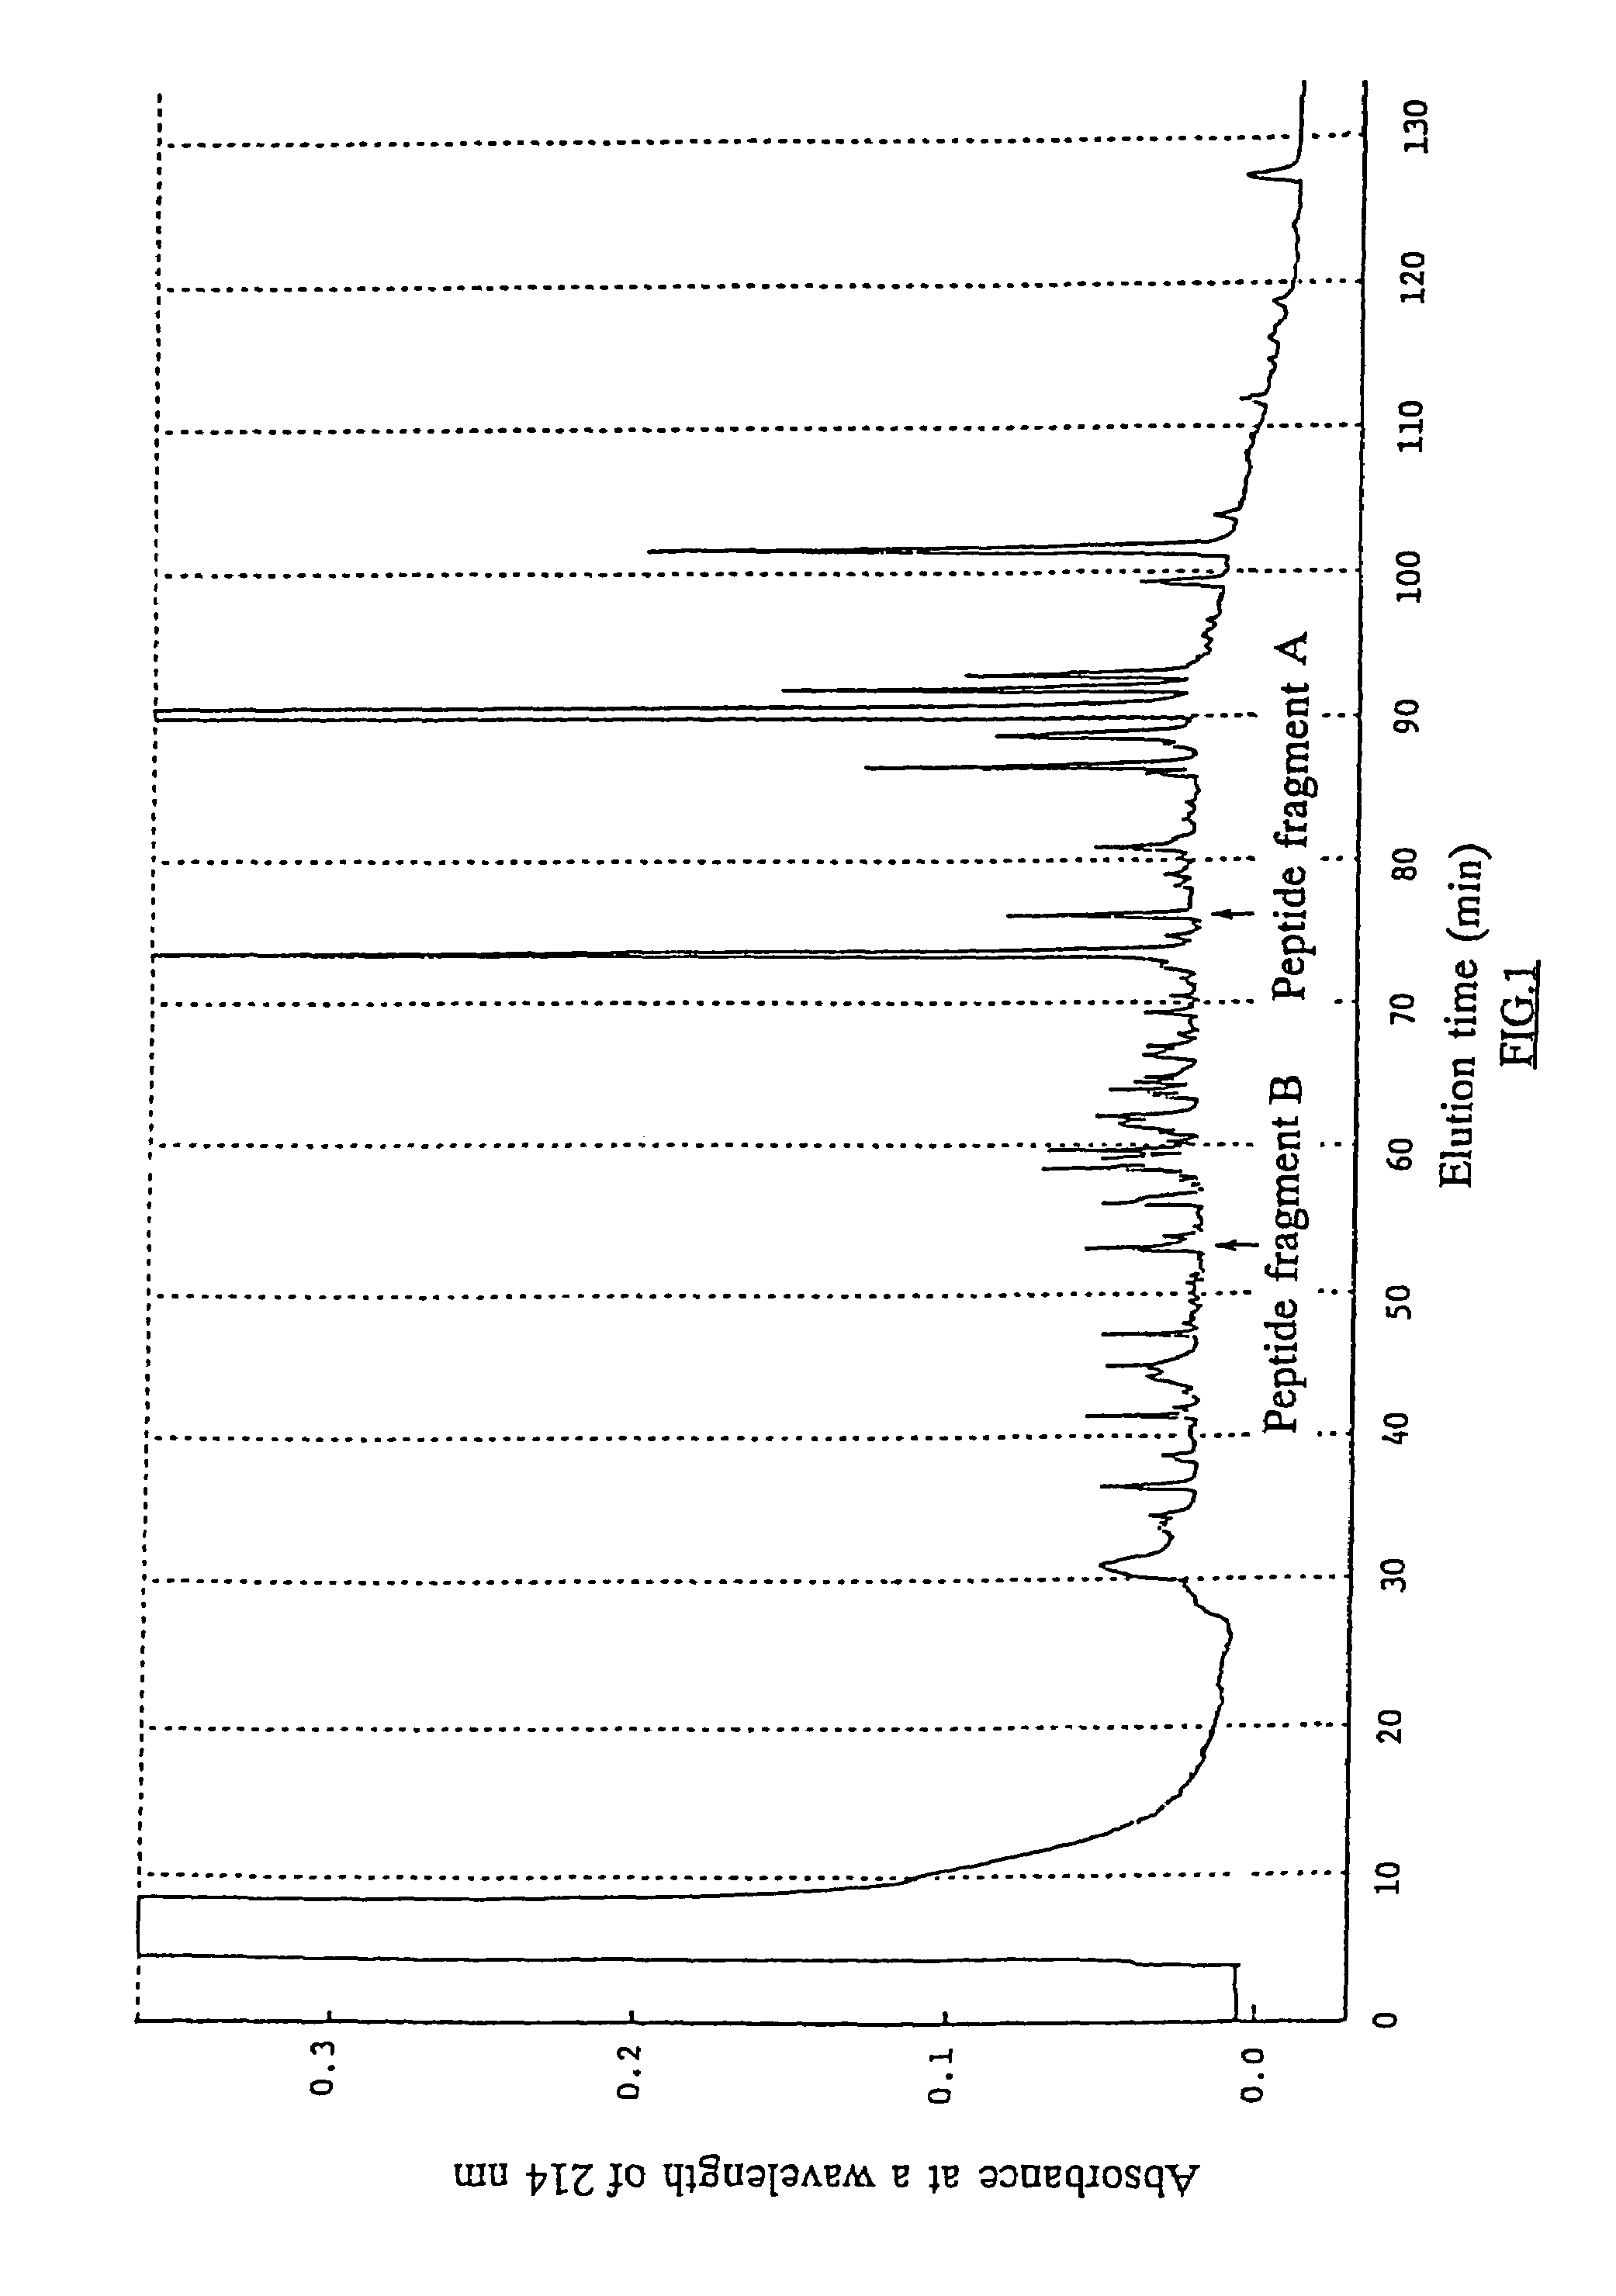 Interferon-γ inducing polypeptide, pharmaceutical composition thereof, monoclonal antibody thereto, and methods of use